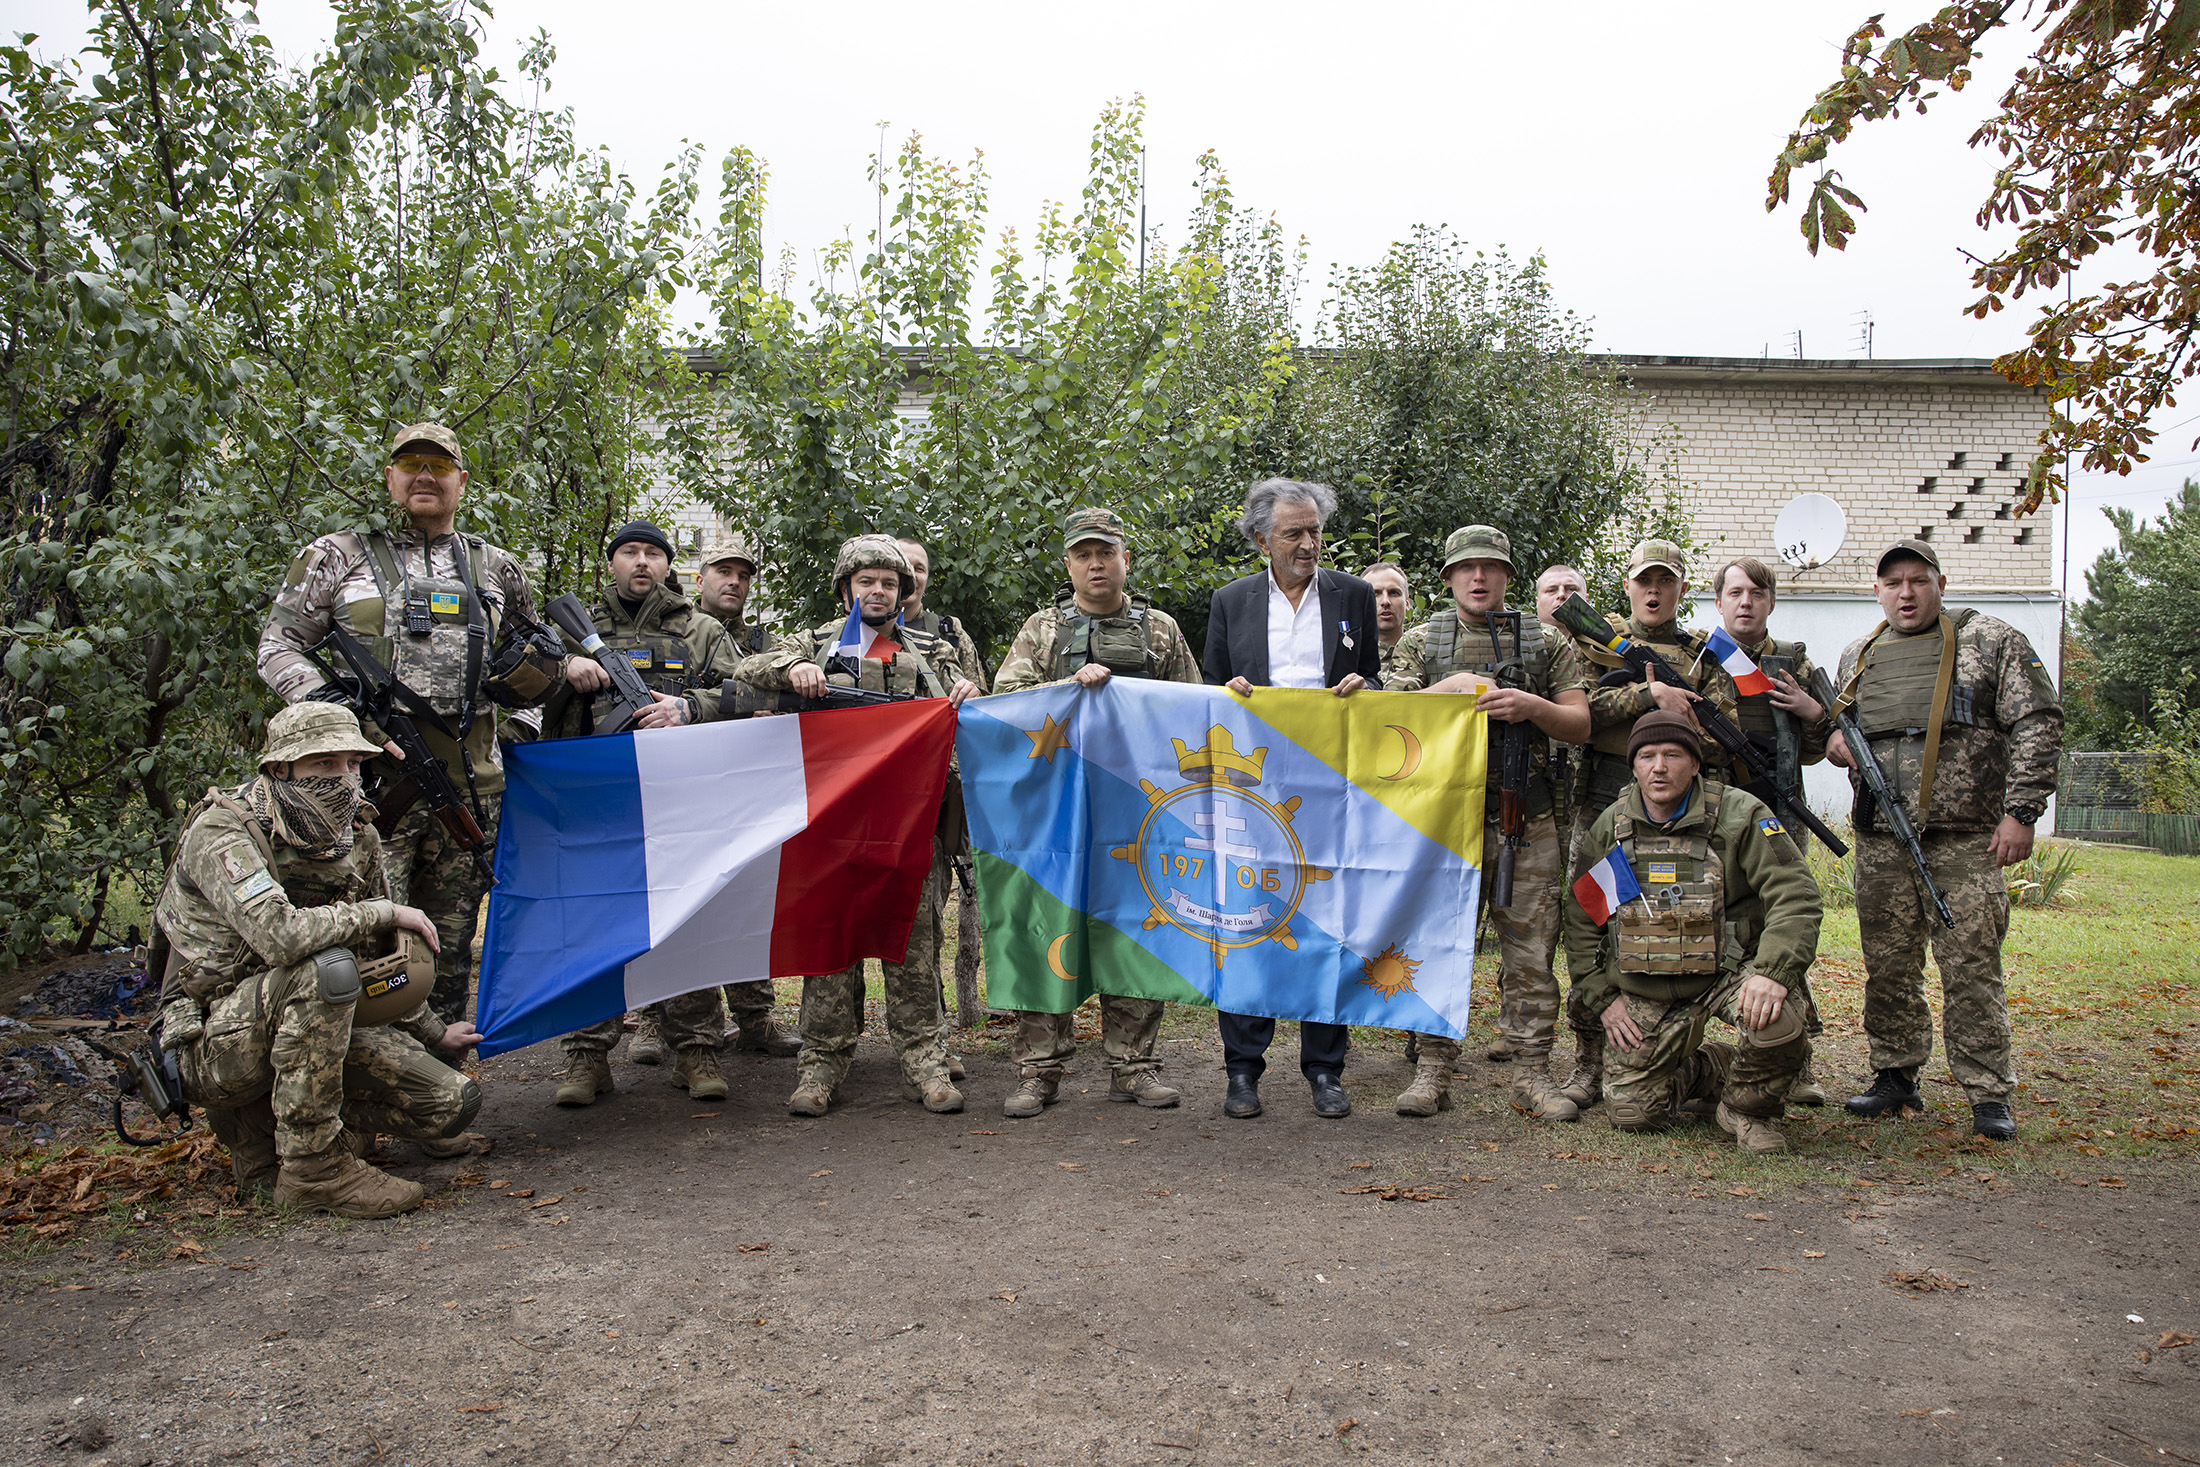 Around Bernard-Henri Lévy, the members of the Charles de Gaulle Battalion mix the colors of Ukraine with those of France.